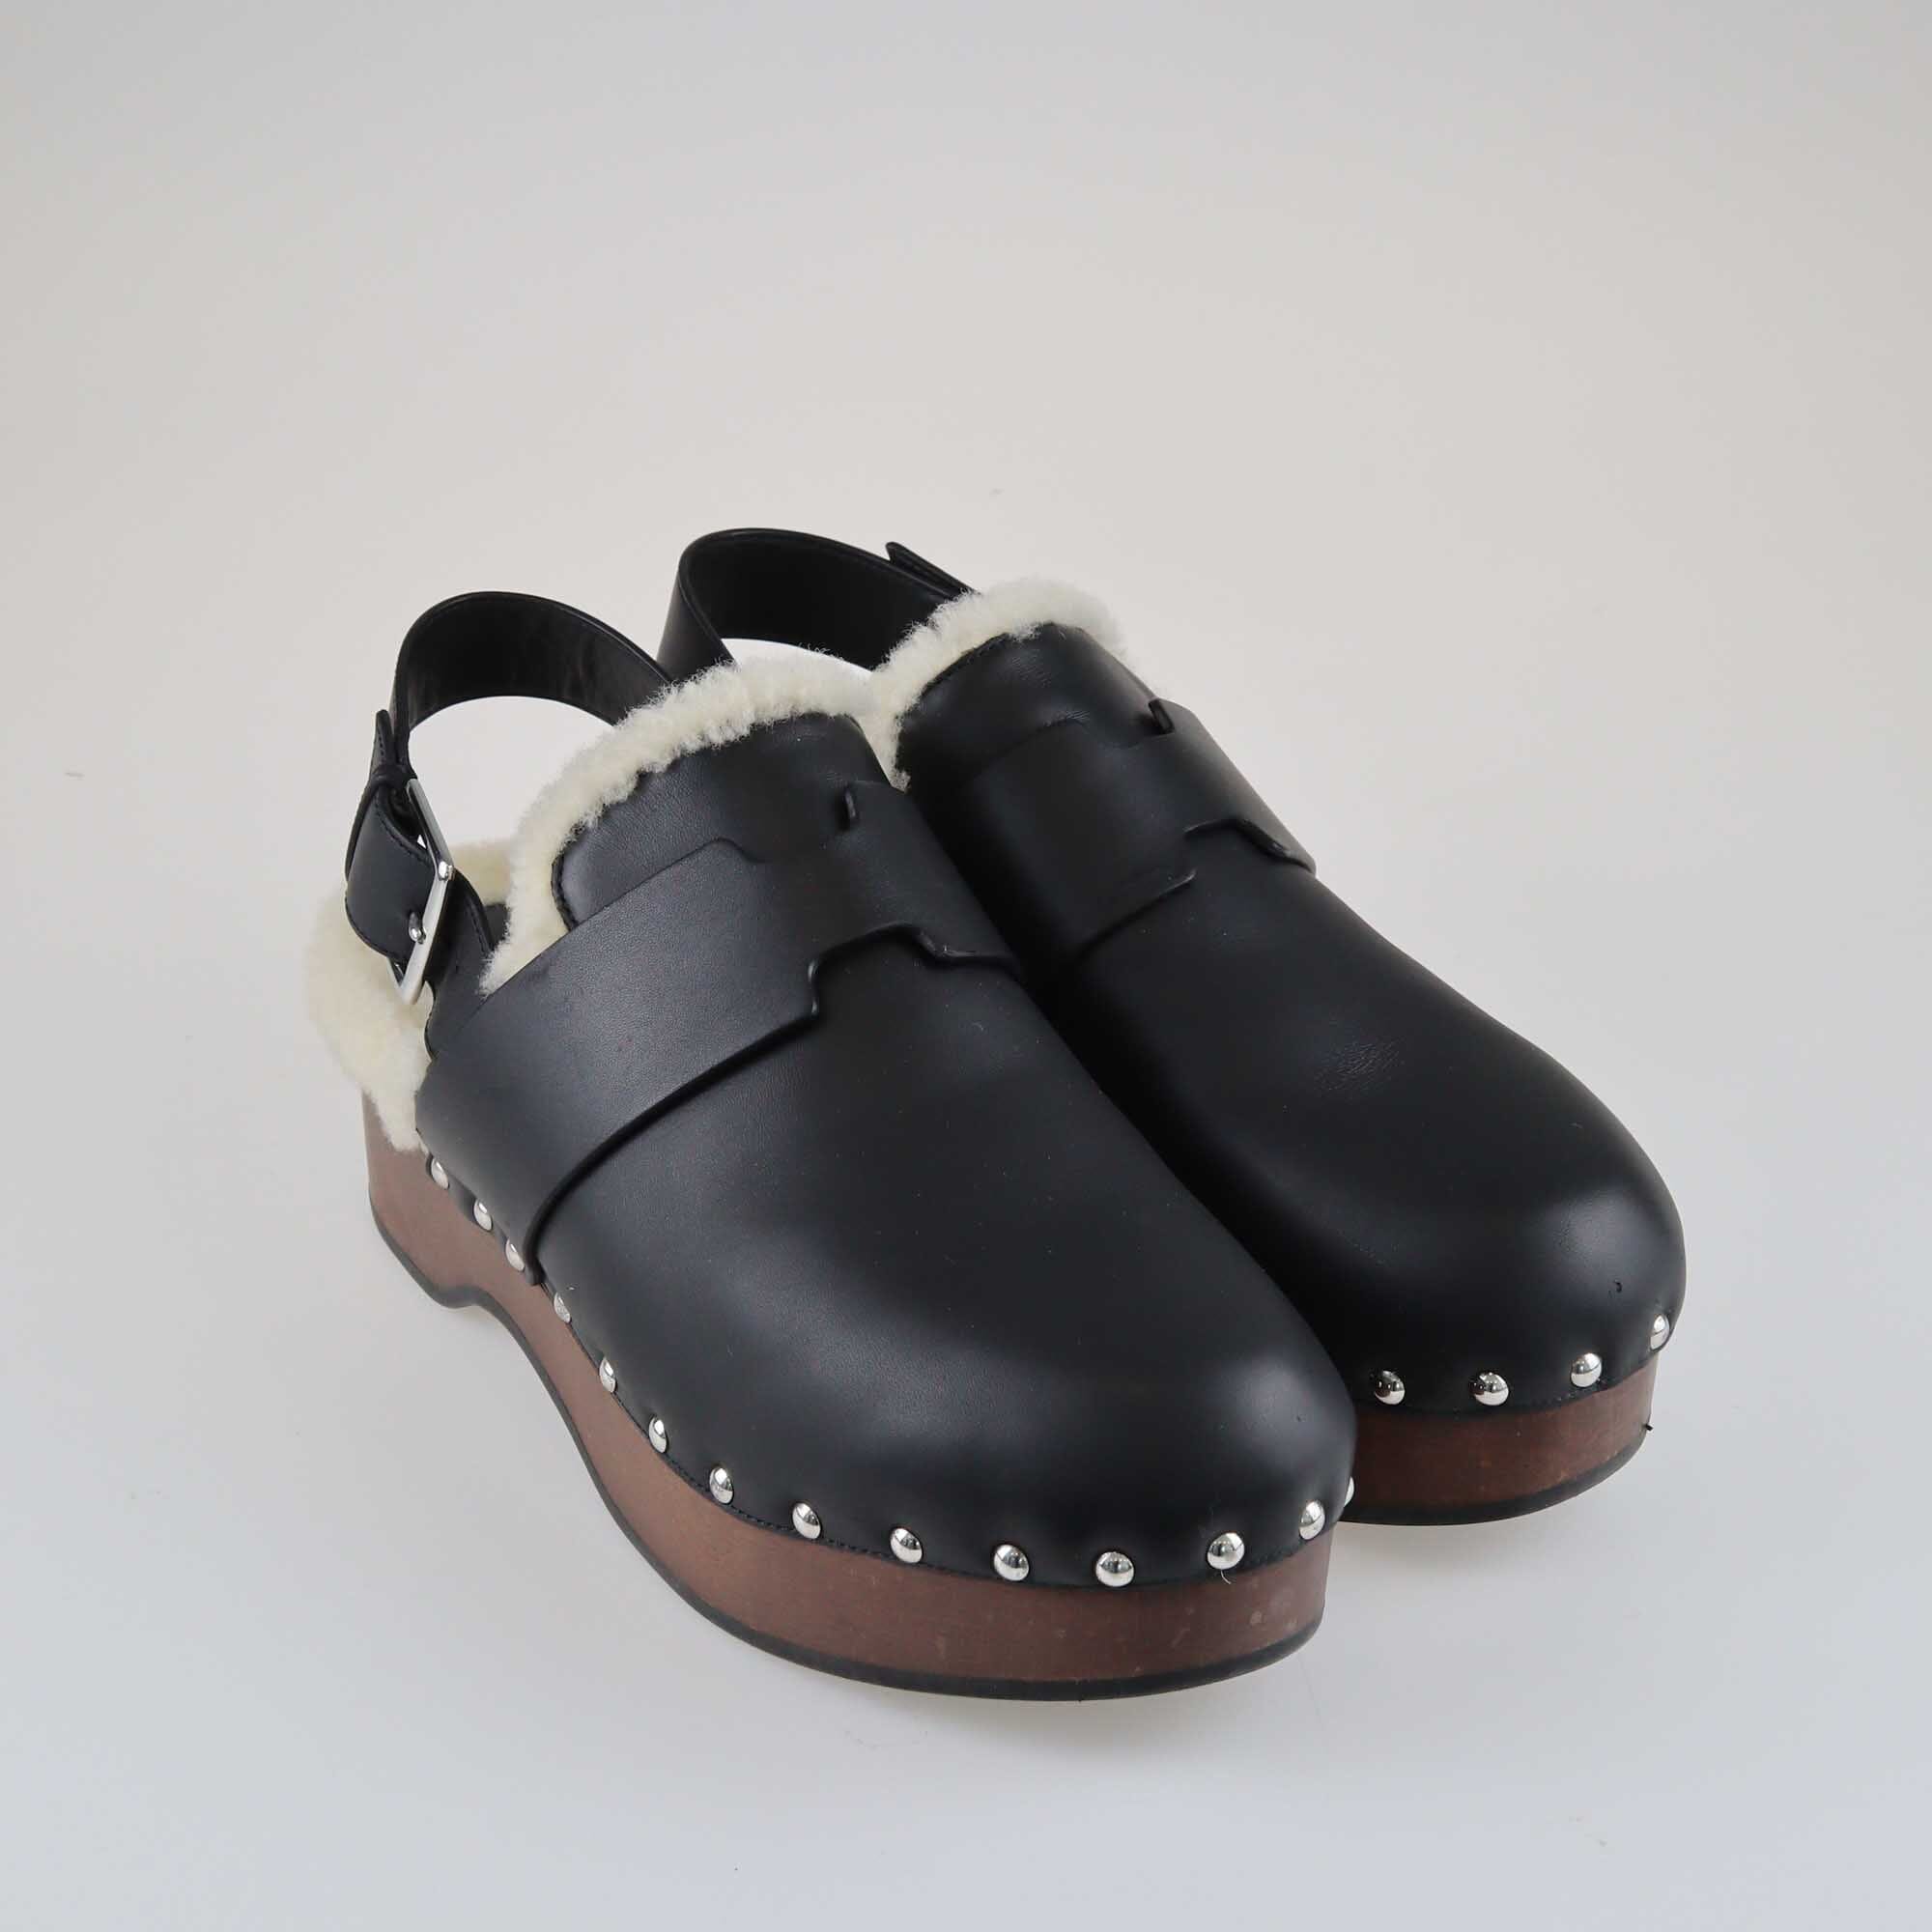 Hermes Black Leather and Shearling Hermione Mule Shoes Hermes 